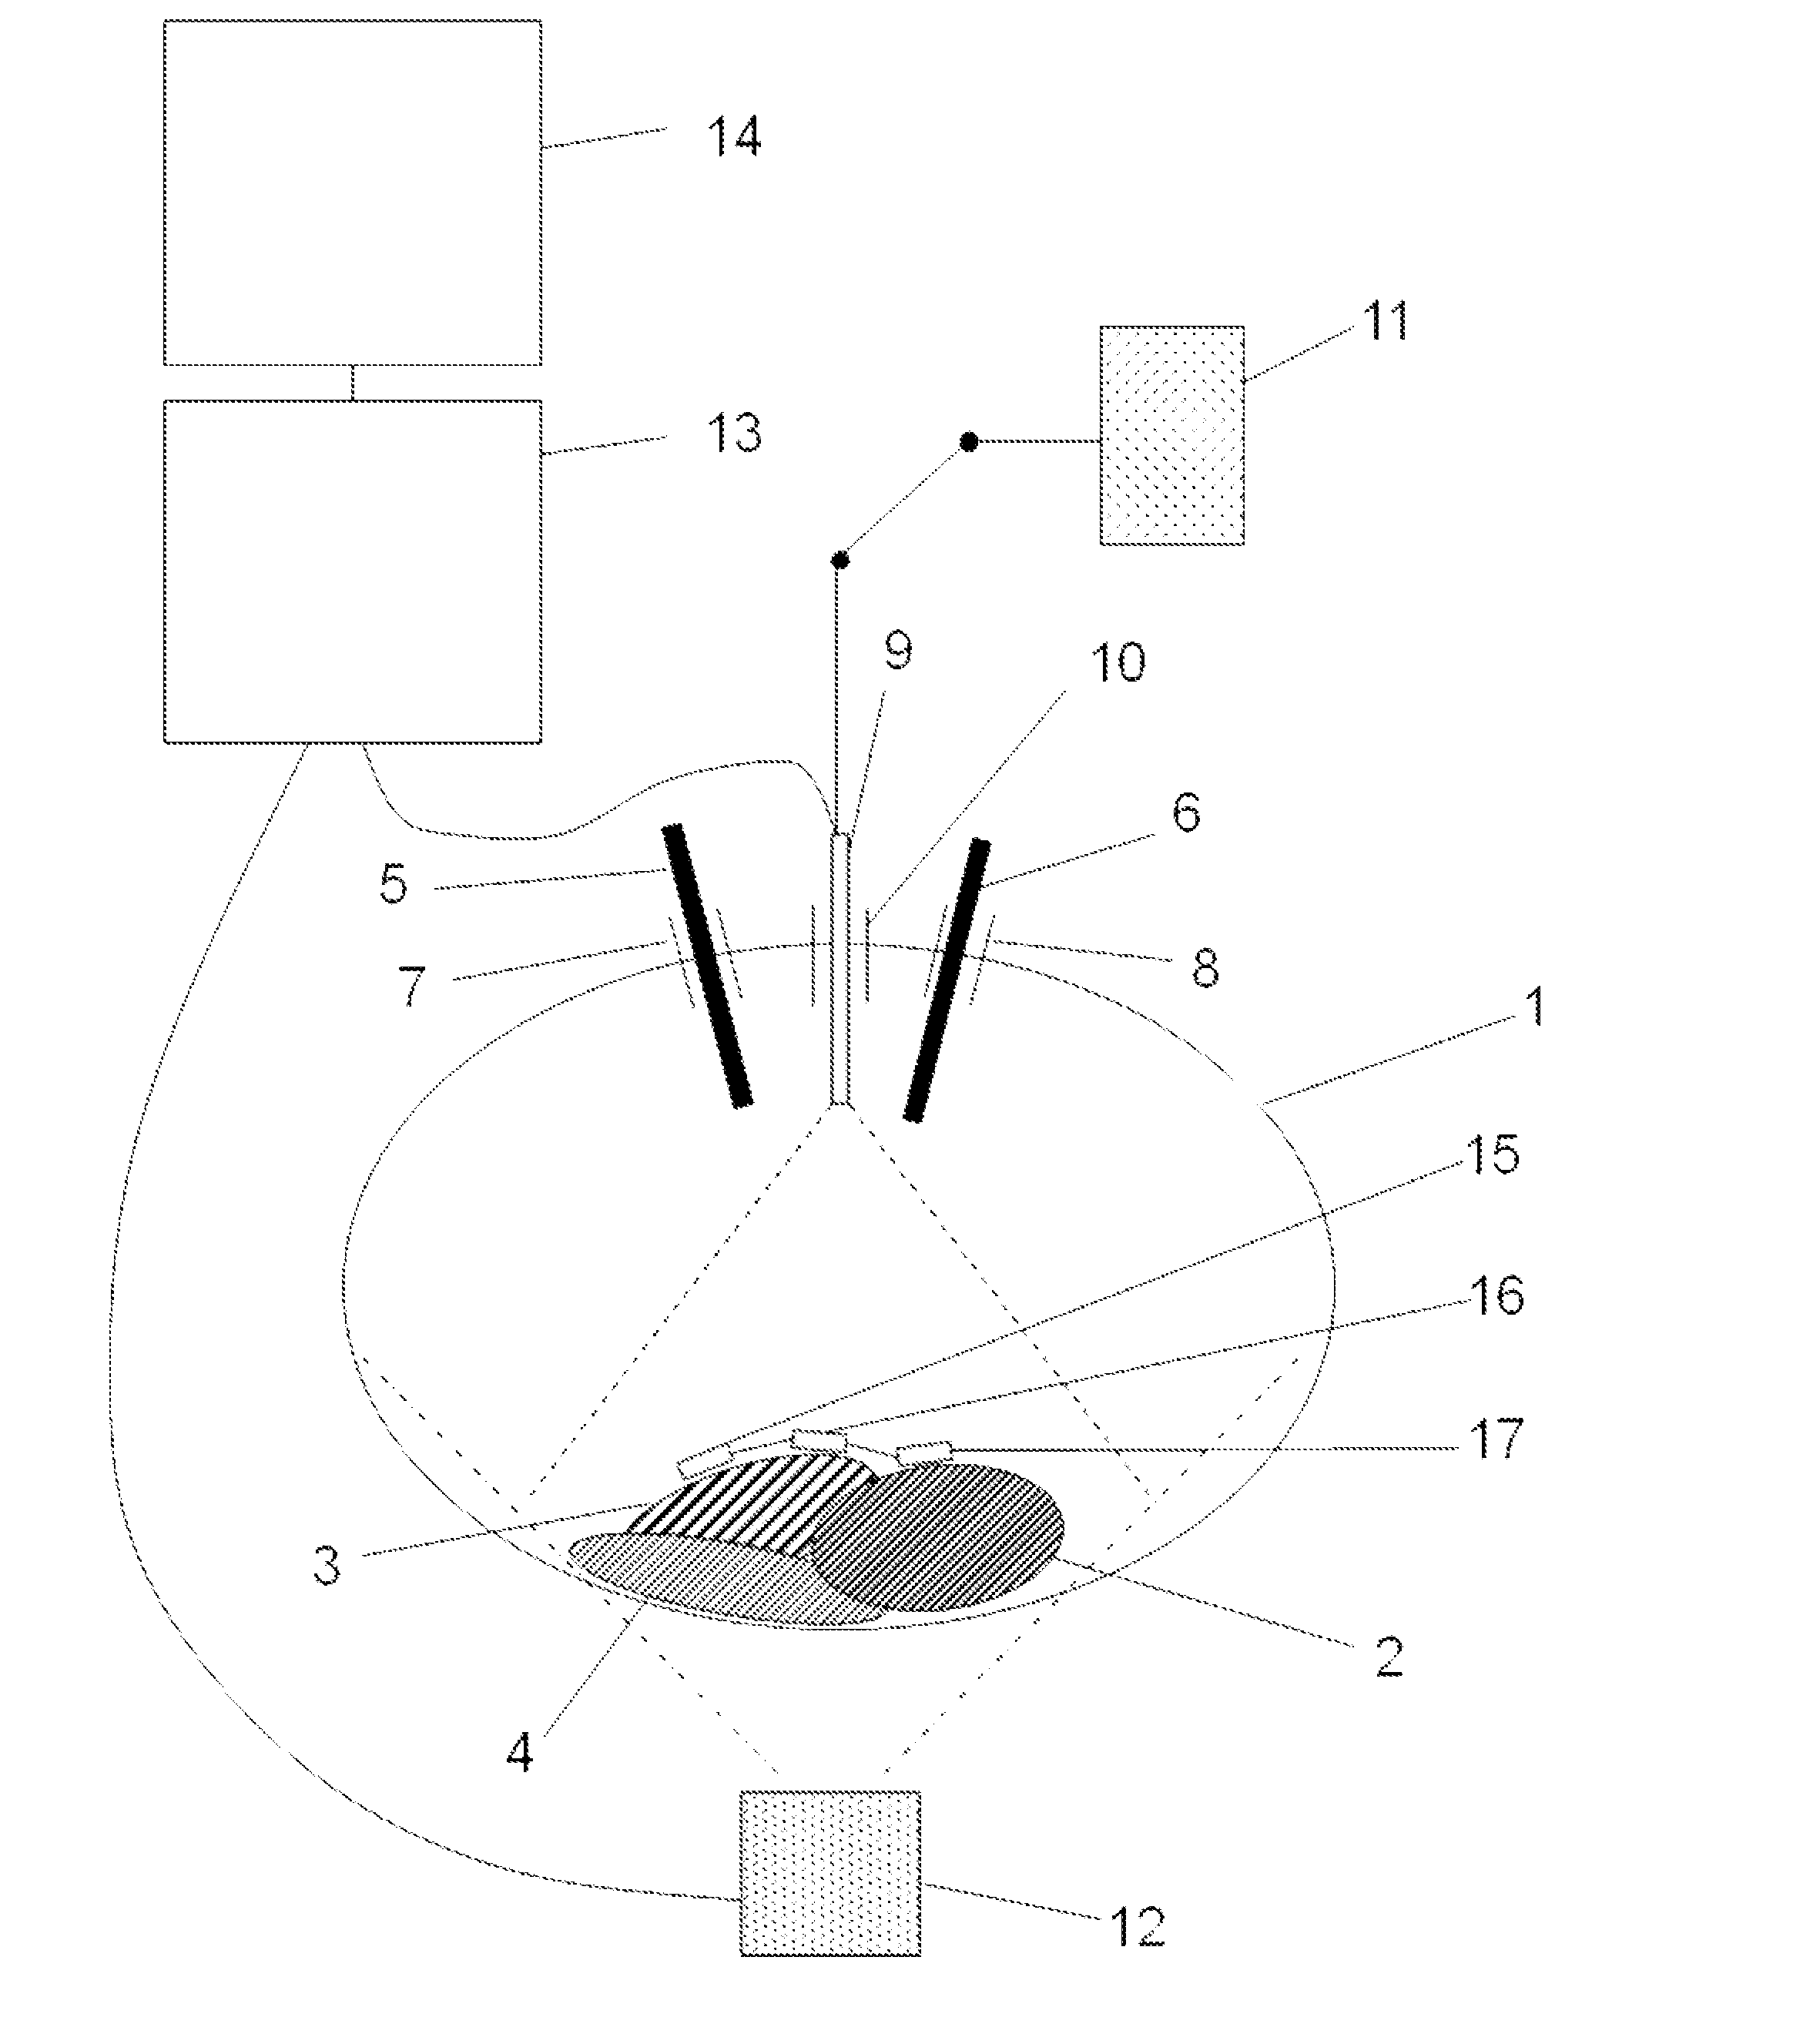 Imaging System for Following a Surgical Tool in an Operation Field